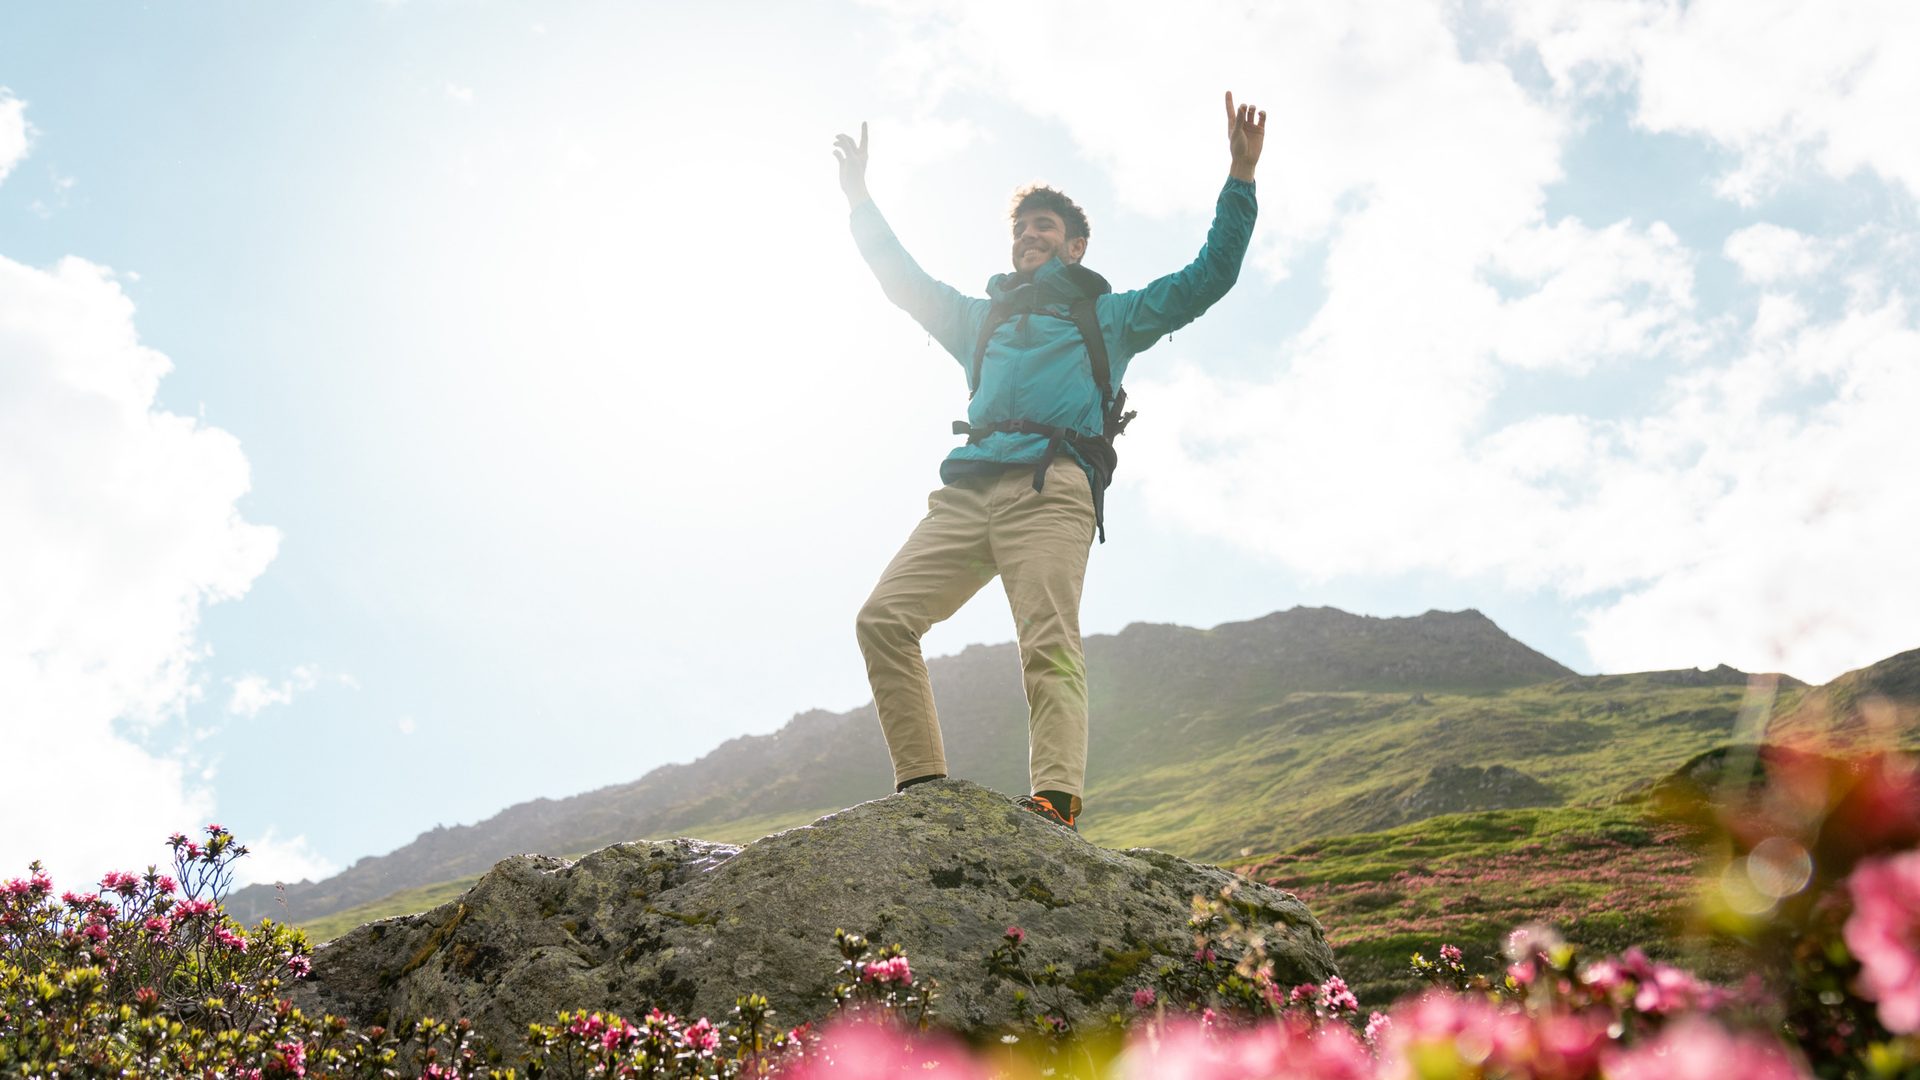 People in nature, Sky, Flower, Plant, Cloud, Ecoregion, Mountain, Happy, Gesture